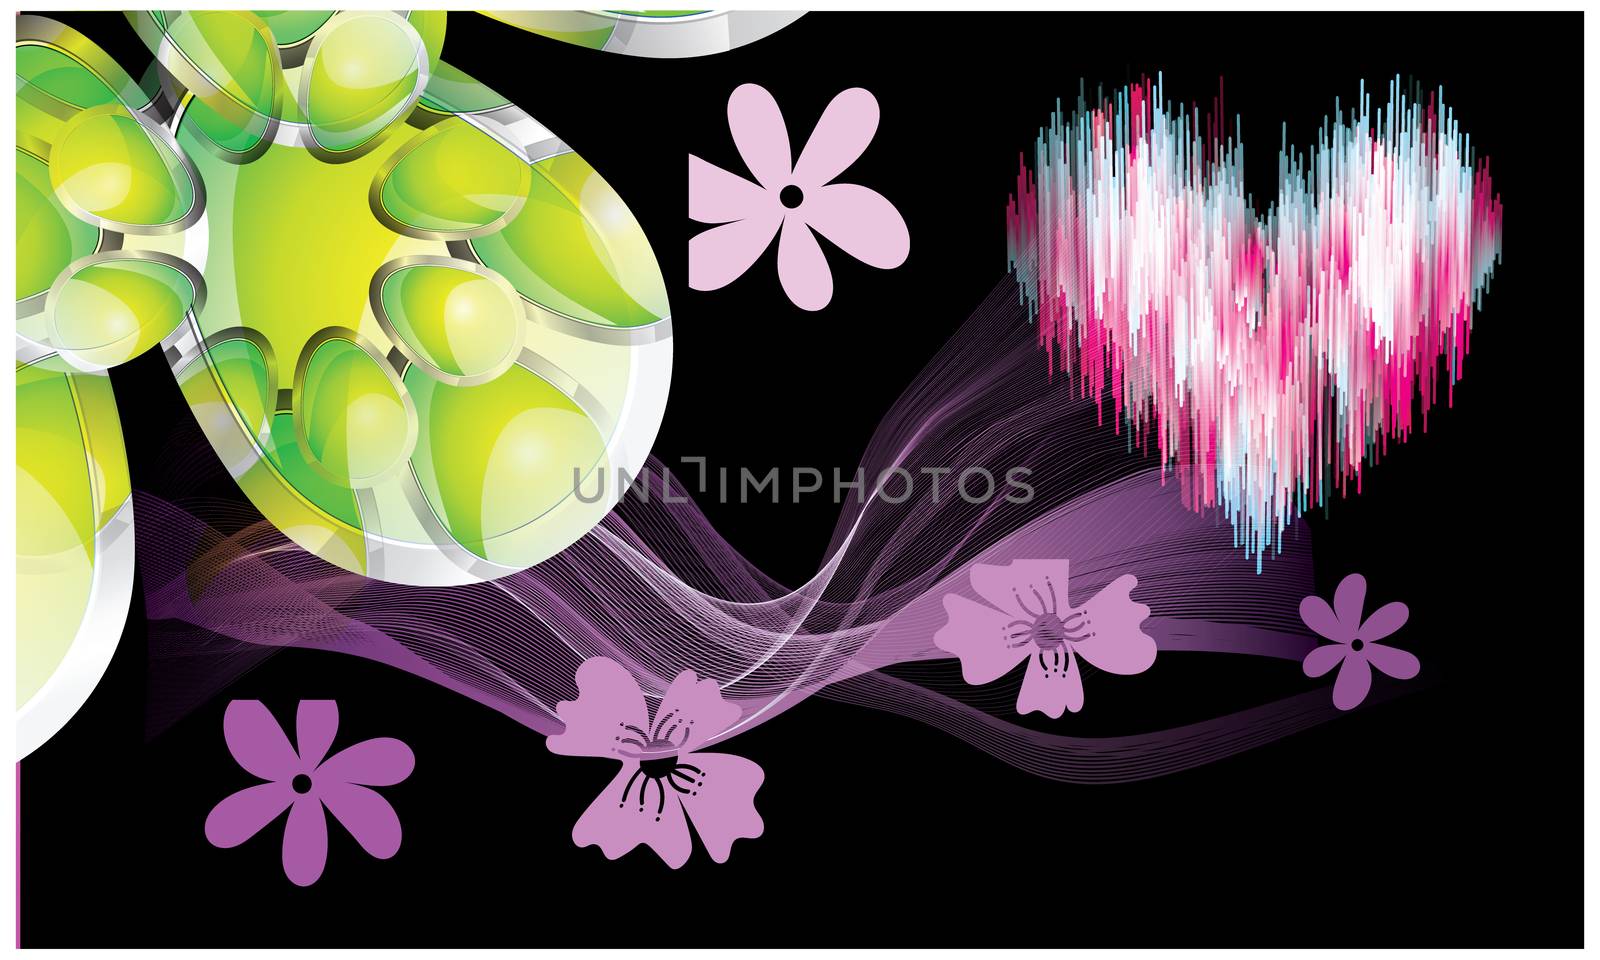 art design with flower and hearts on abstract background by aanavcreationsplus